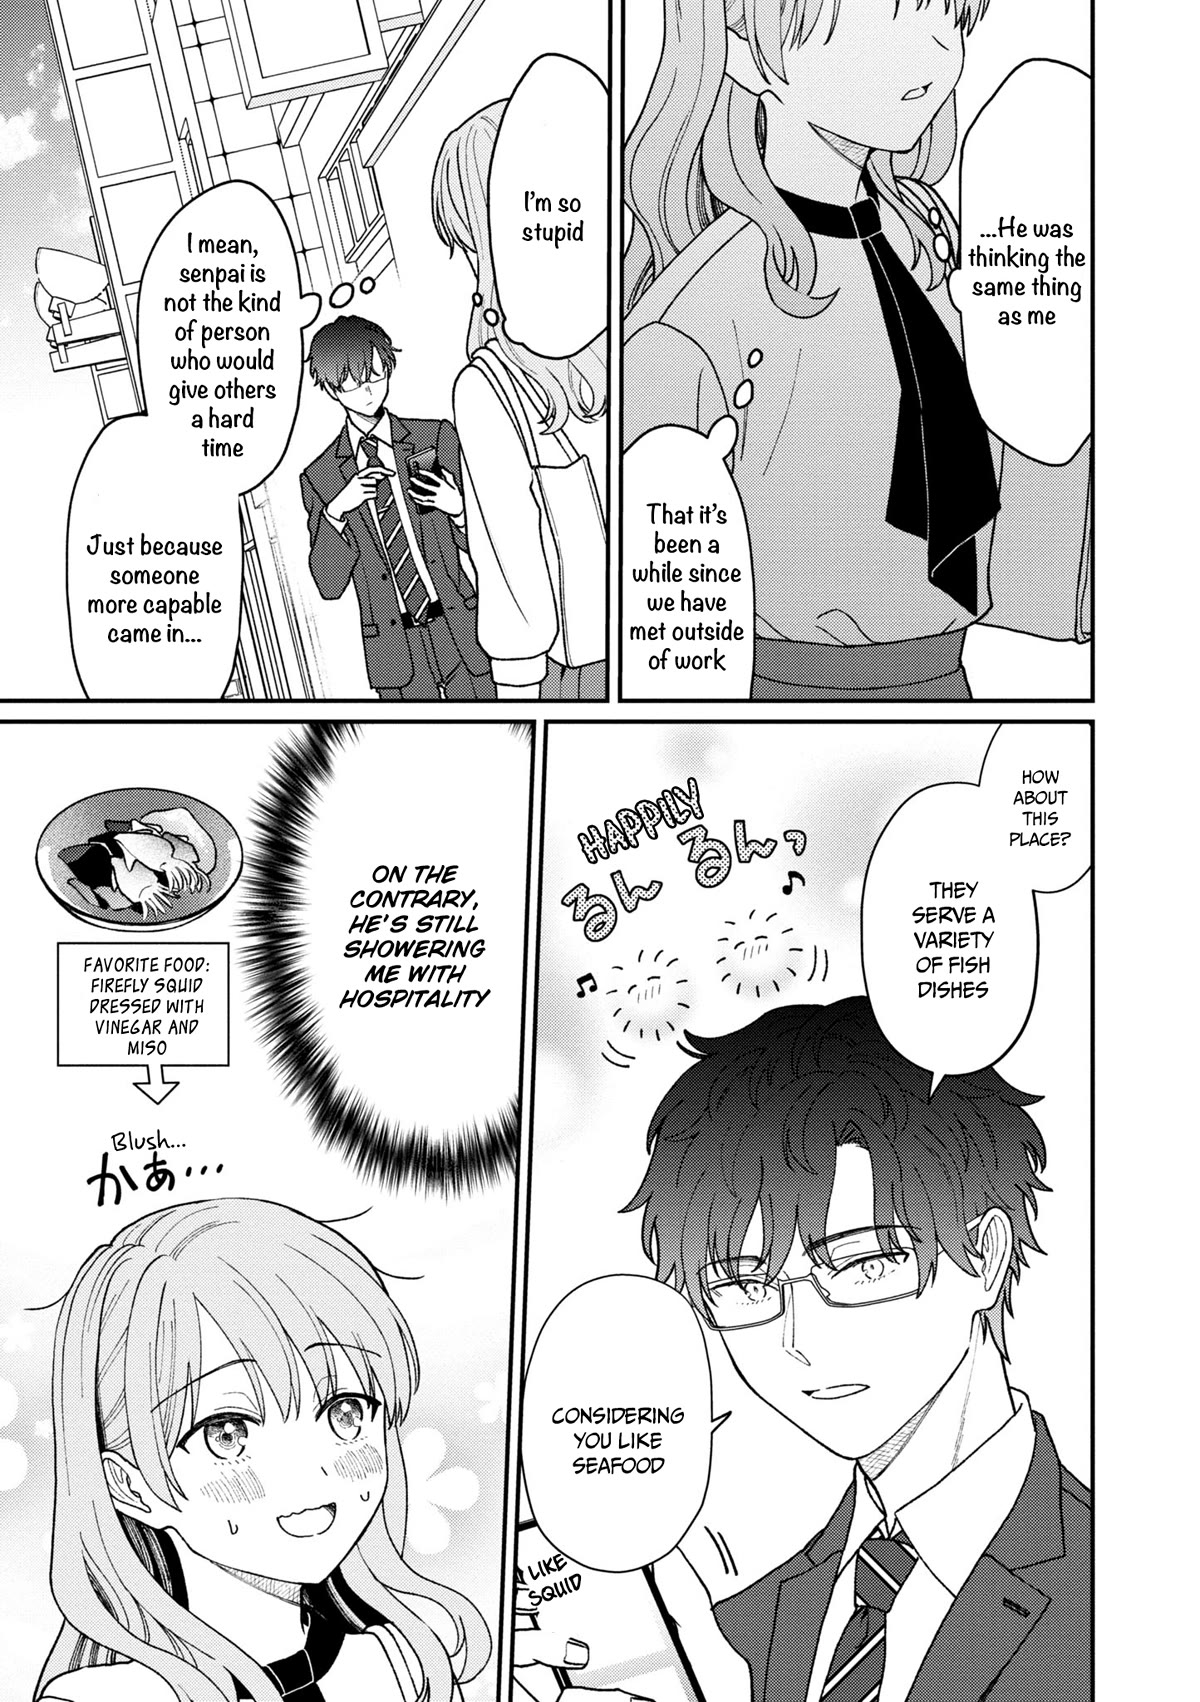 The New-Hire Who Could "Read" Emotions and the Unsociable Senpai - chapter 23 - #6